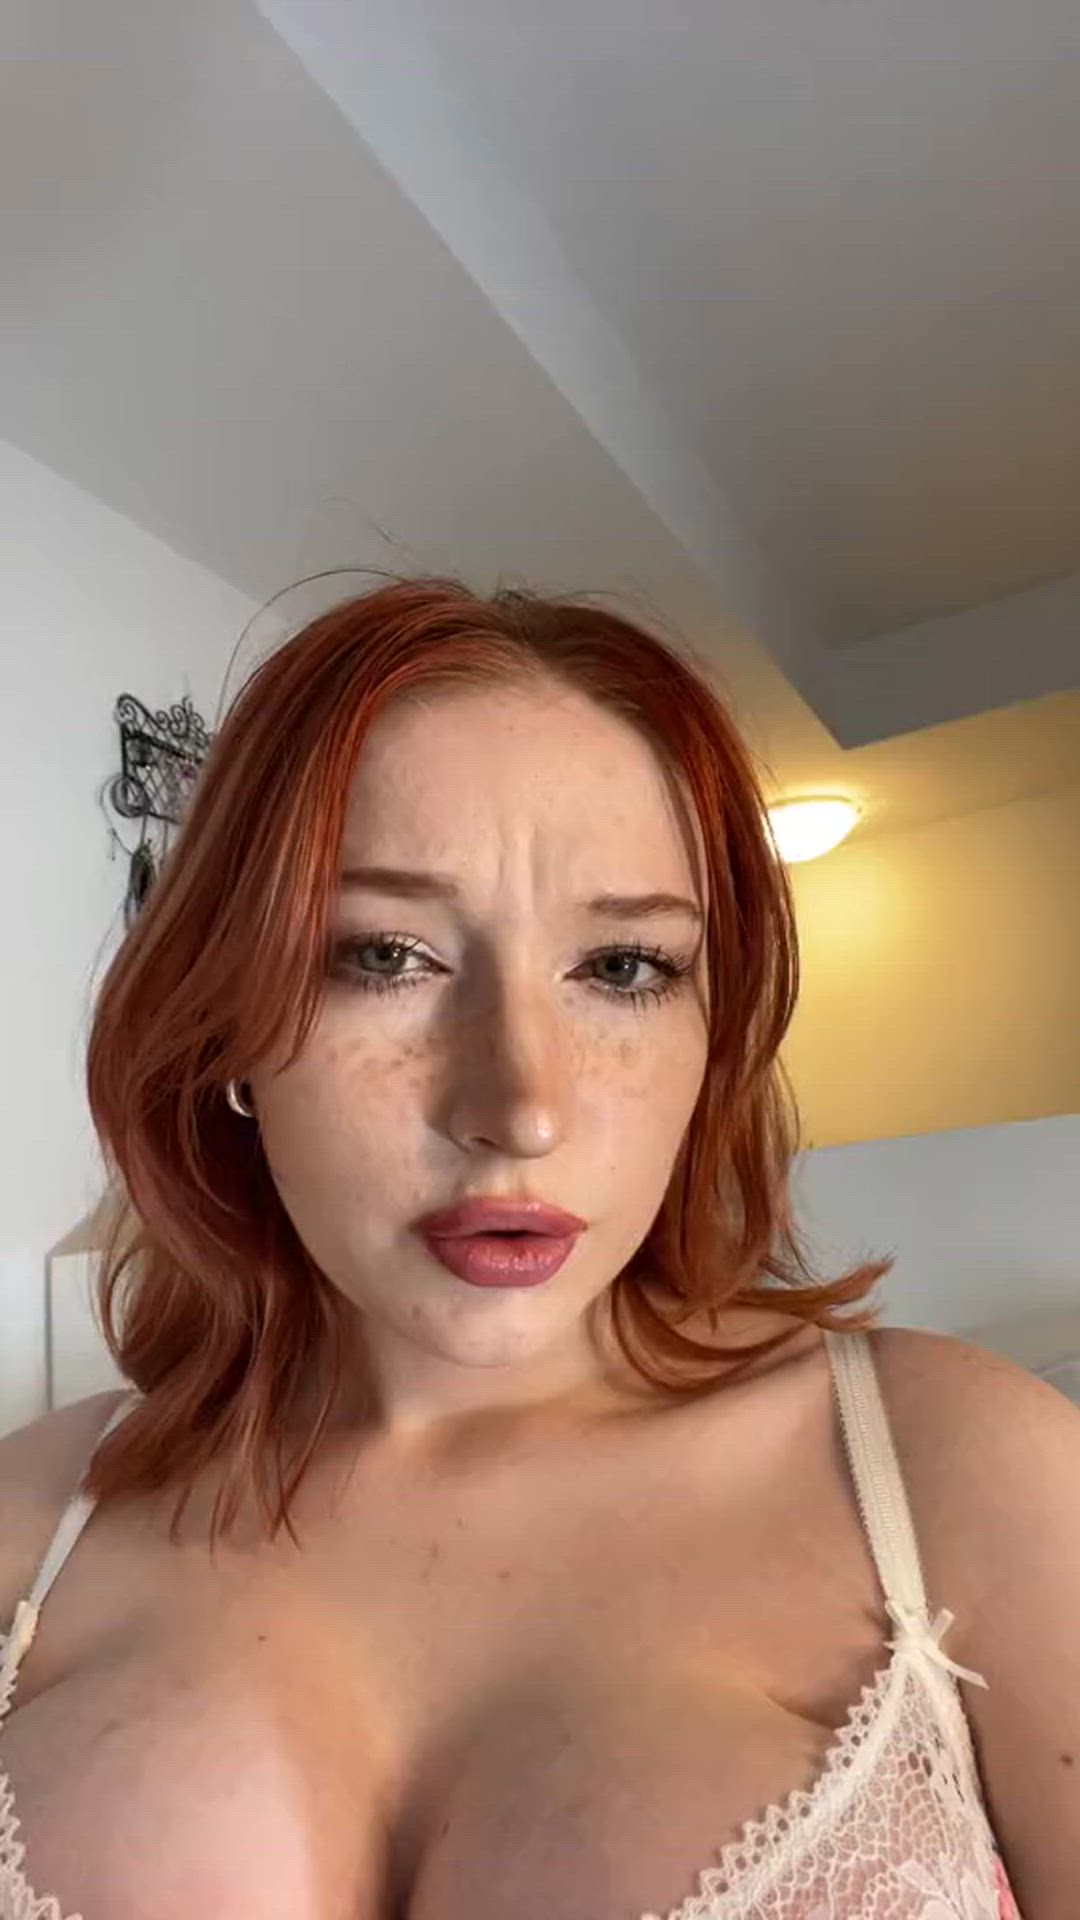 Tits porn video with onlyfans model yourbabylacey <strong>@yourbabylacey</strong>